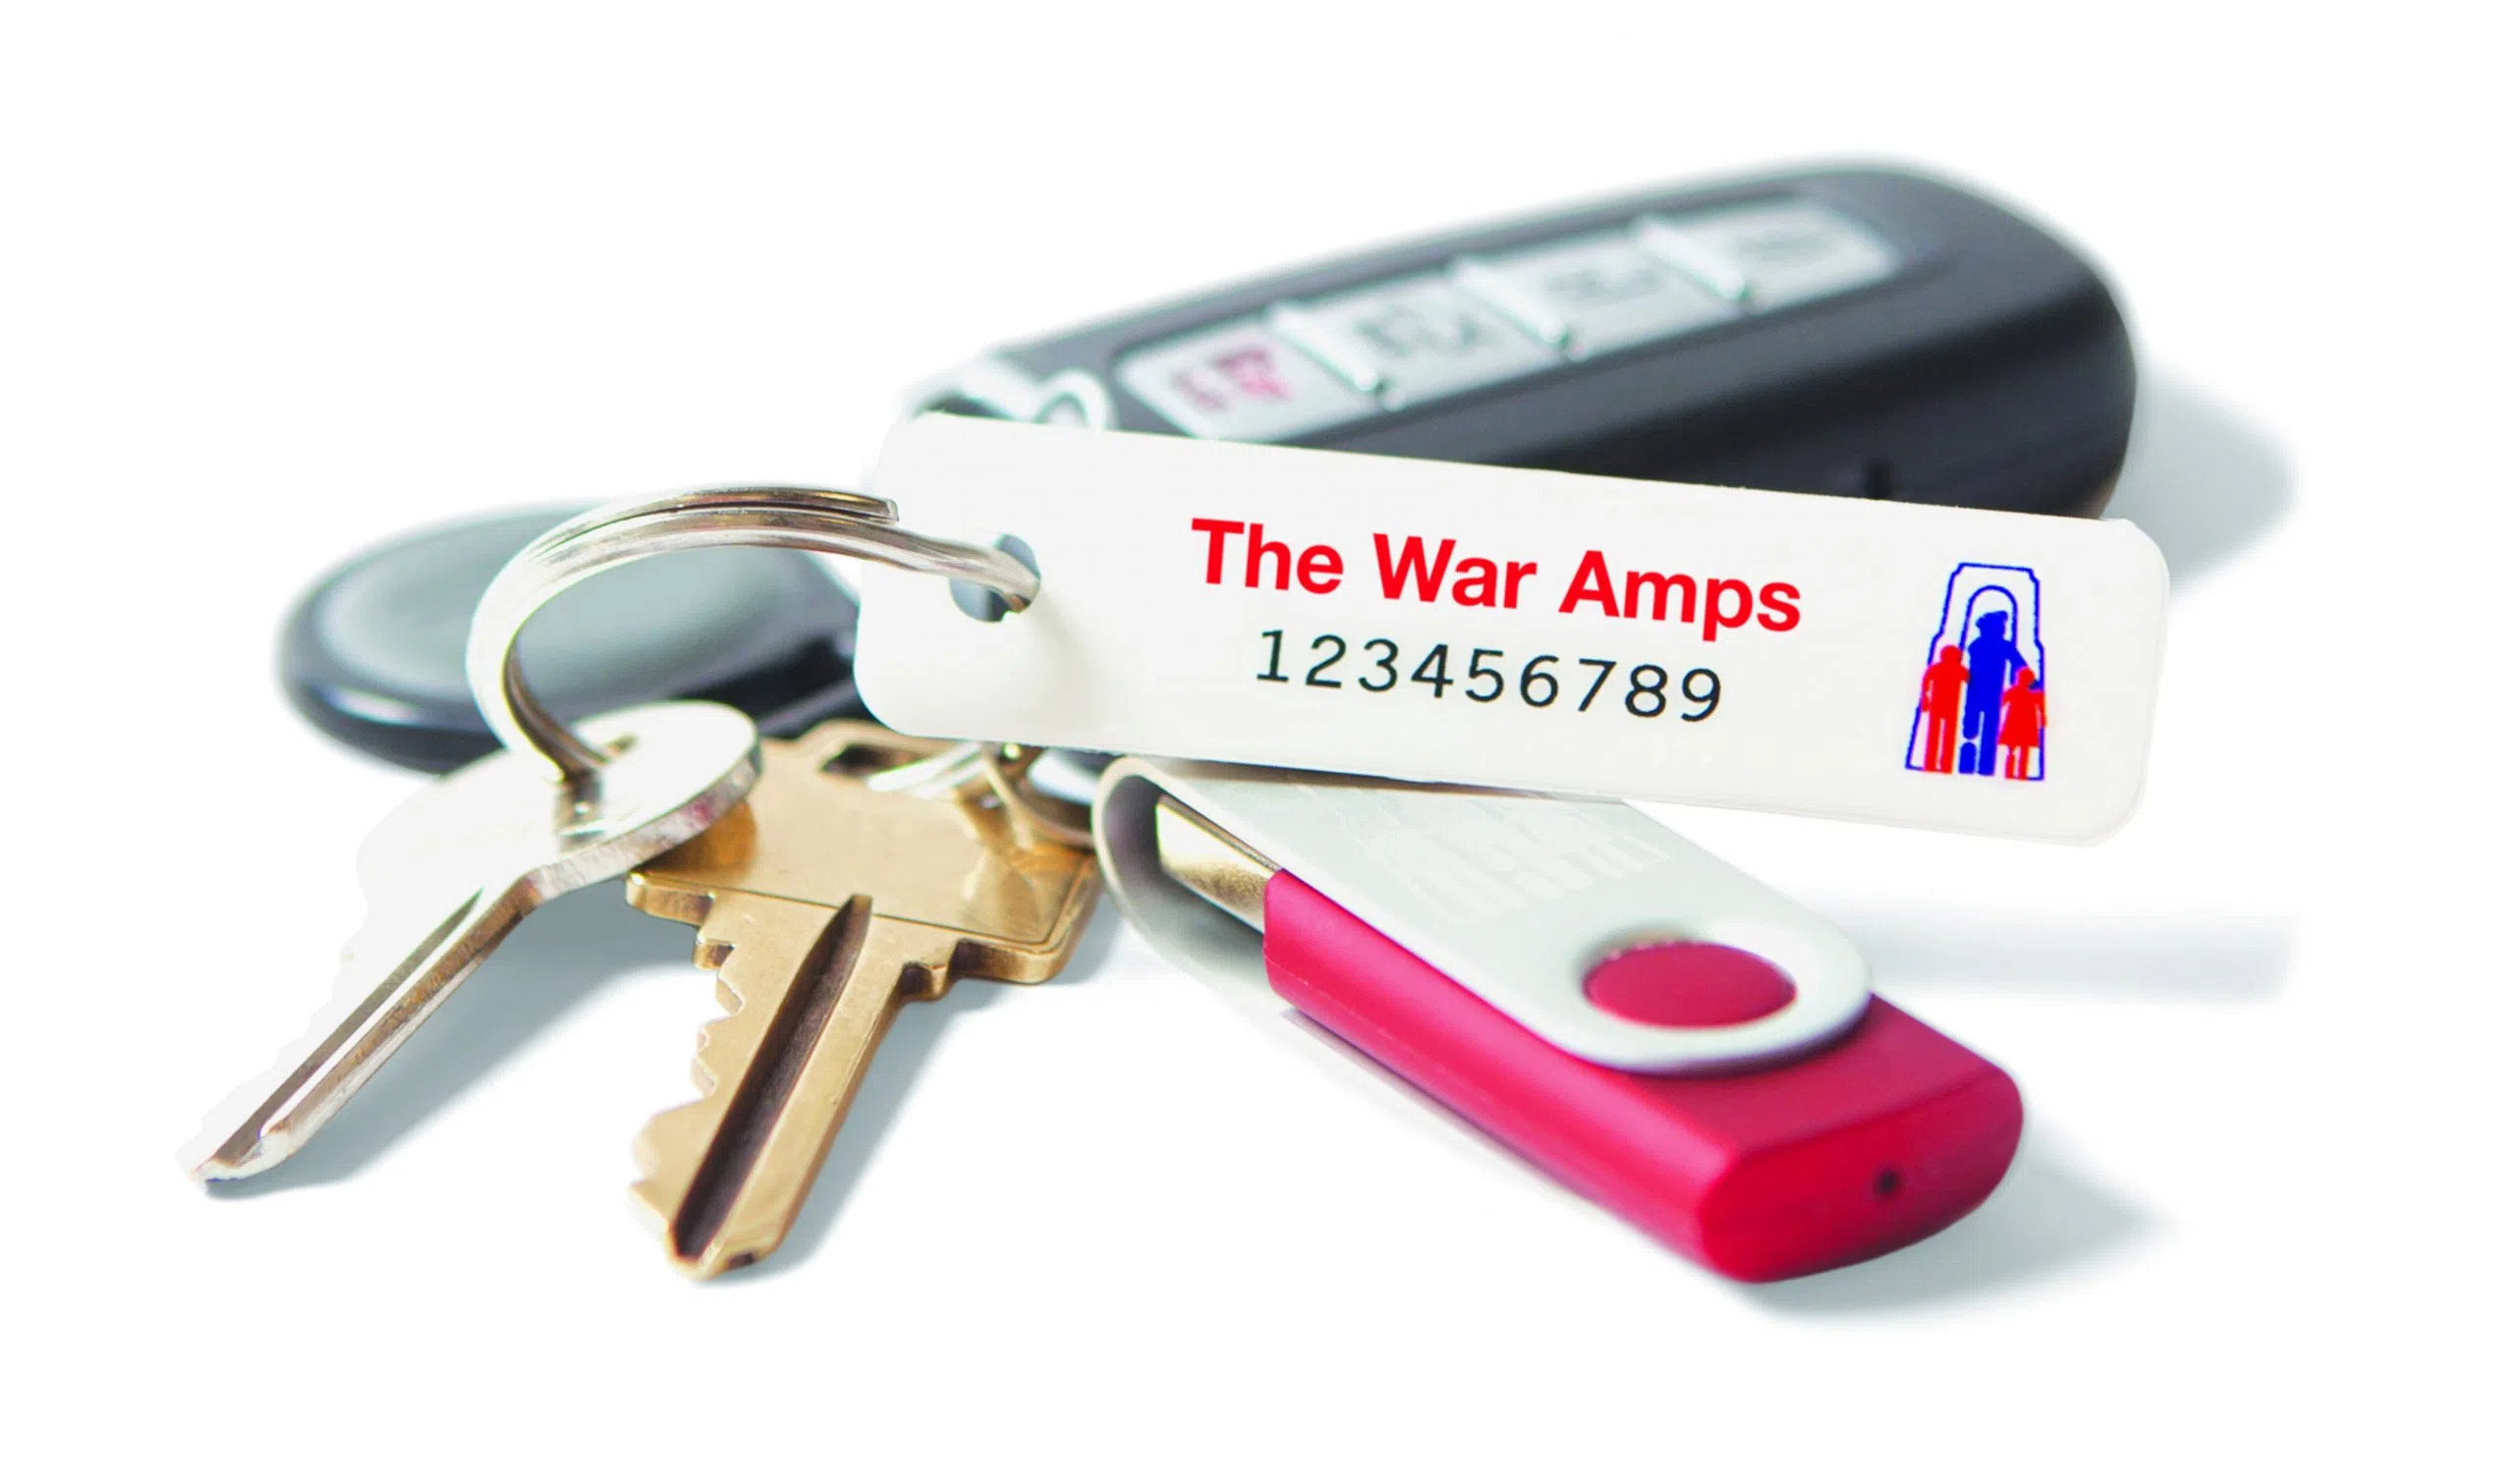 War Amps Launches Key Tag Campaign